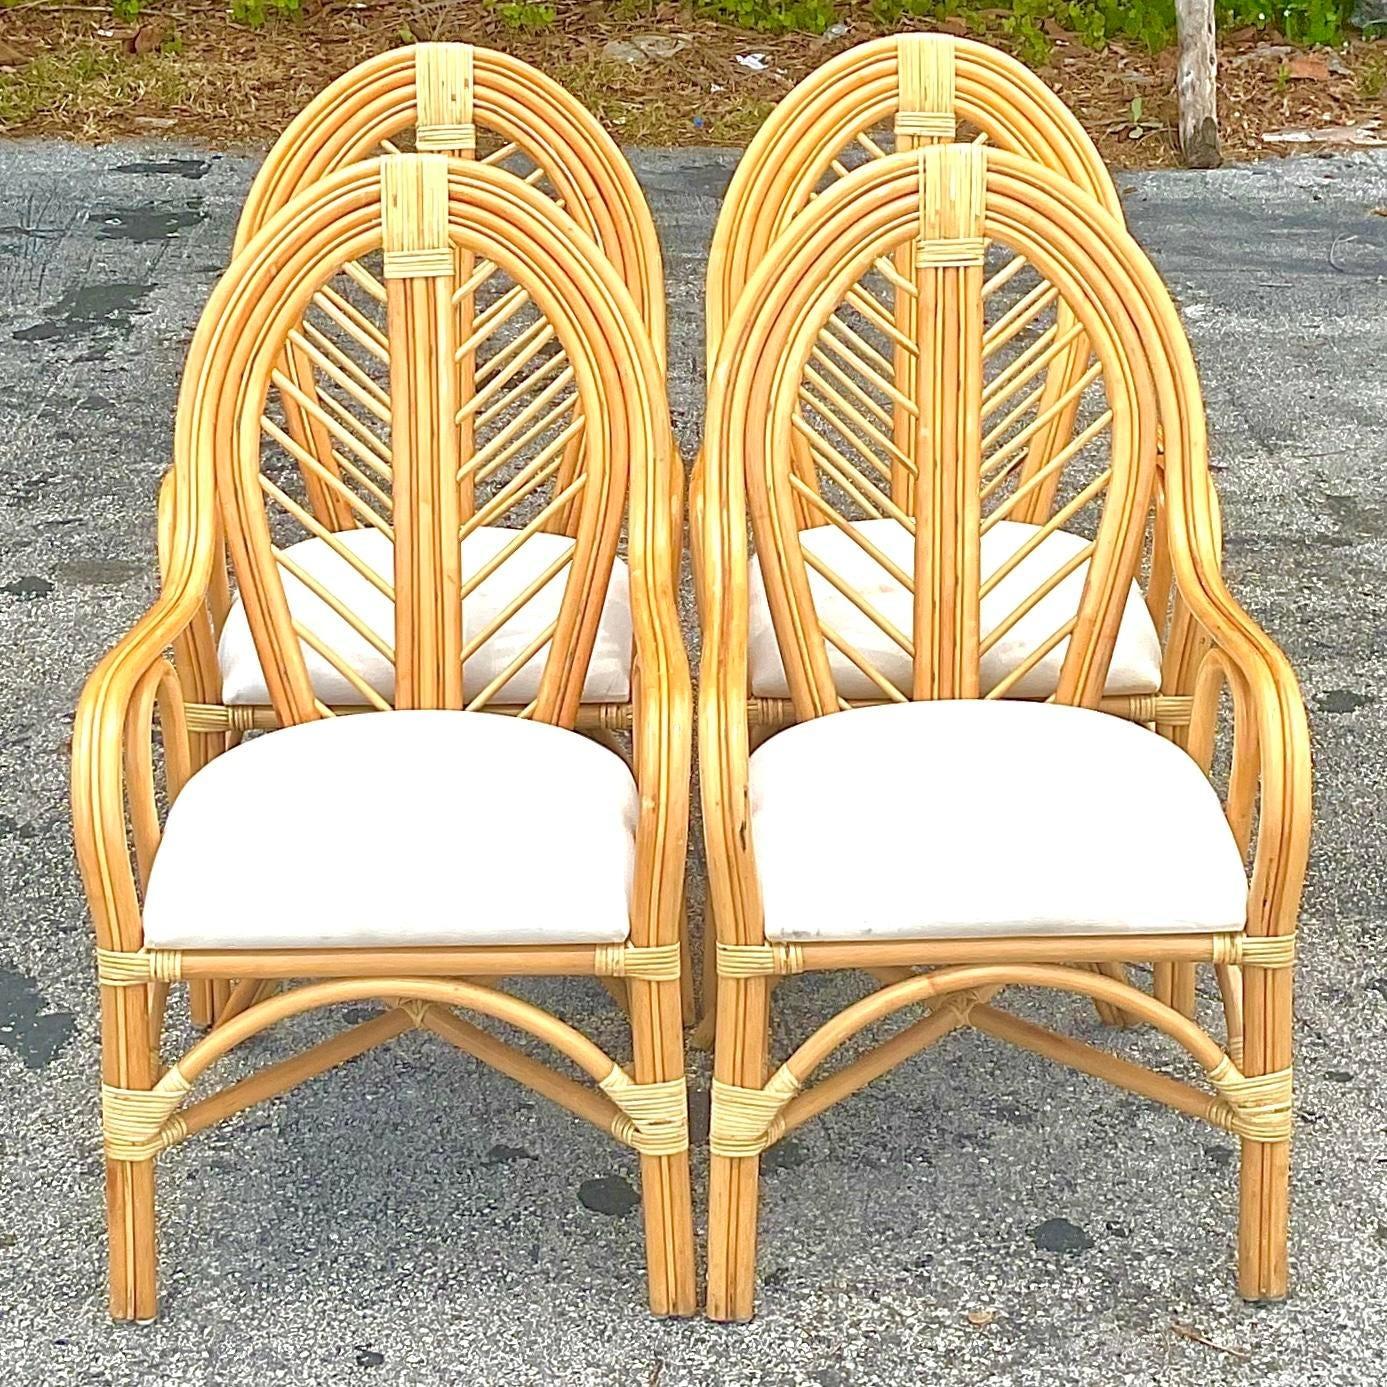 Vintage Coastal Bent Rattan Dining Chairs - Set of 4 In Good Condition For Sale In west palm beach, FL